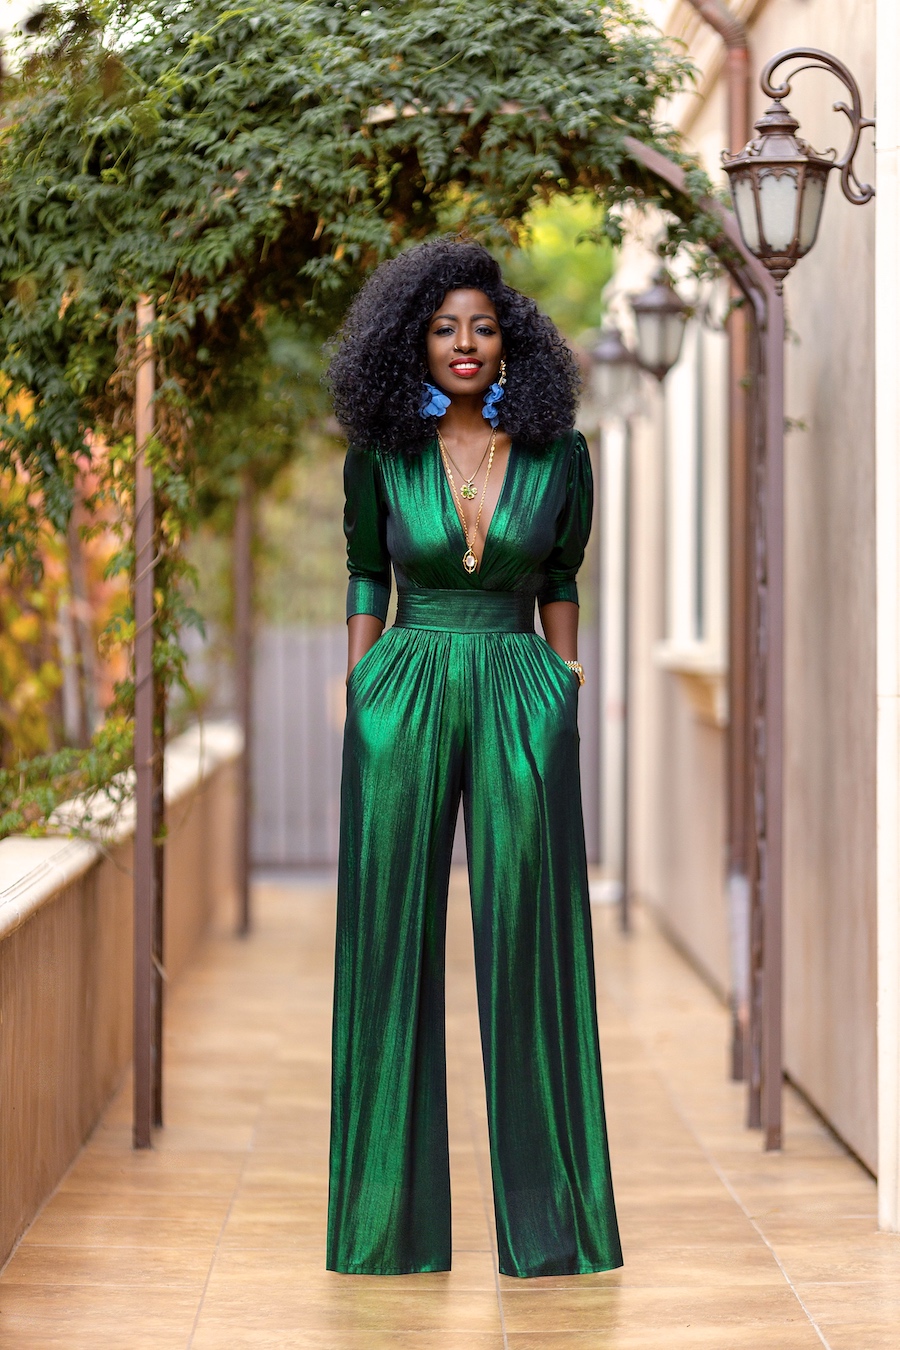 Love the Look! THIS Dazzling Emerald Green Jumpsuit (Perfect for New Years Eve!)